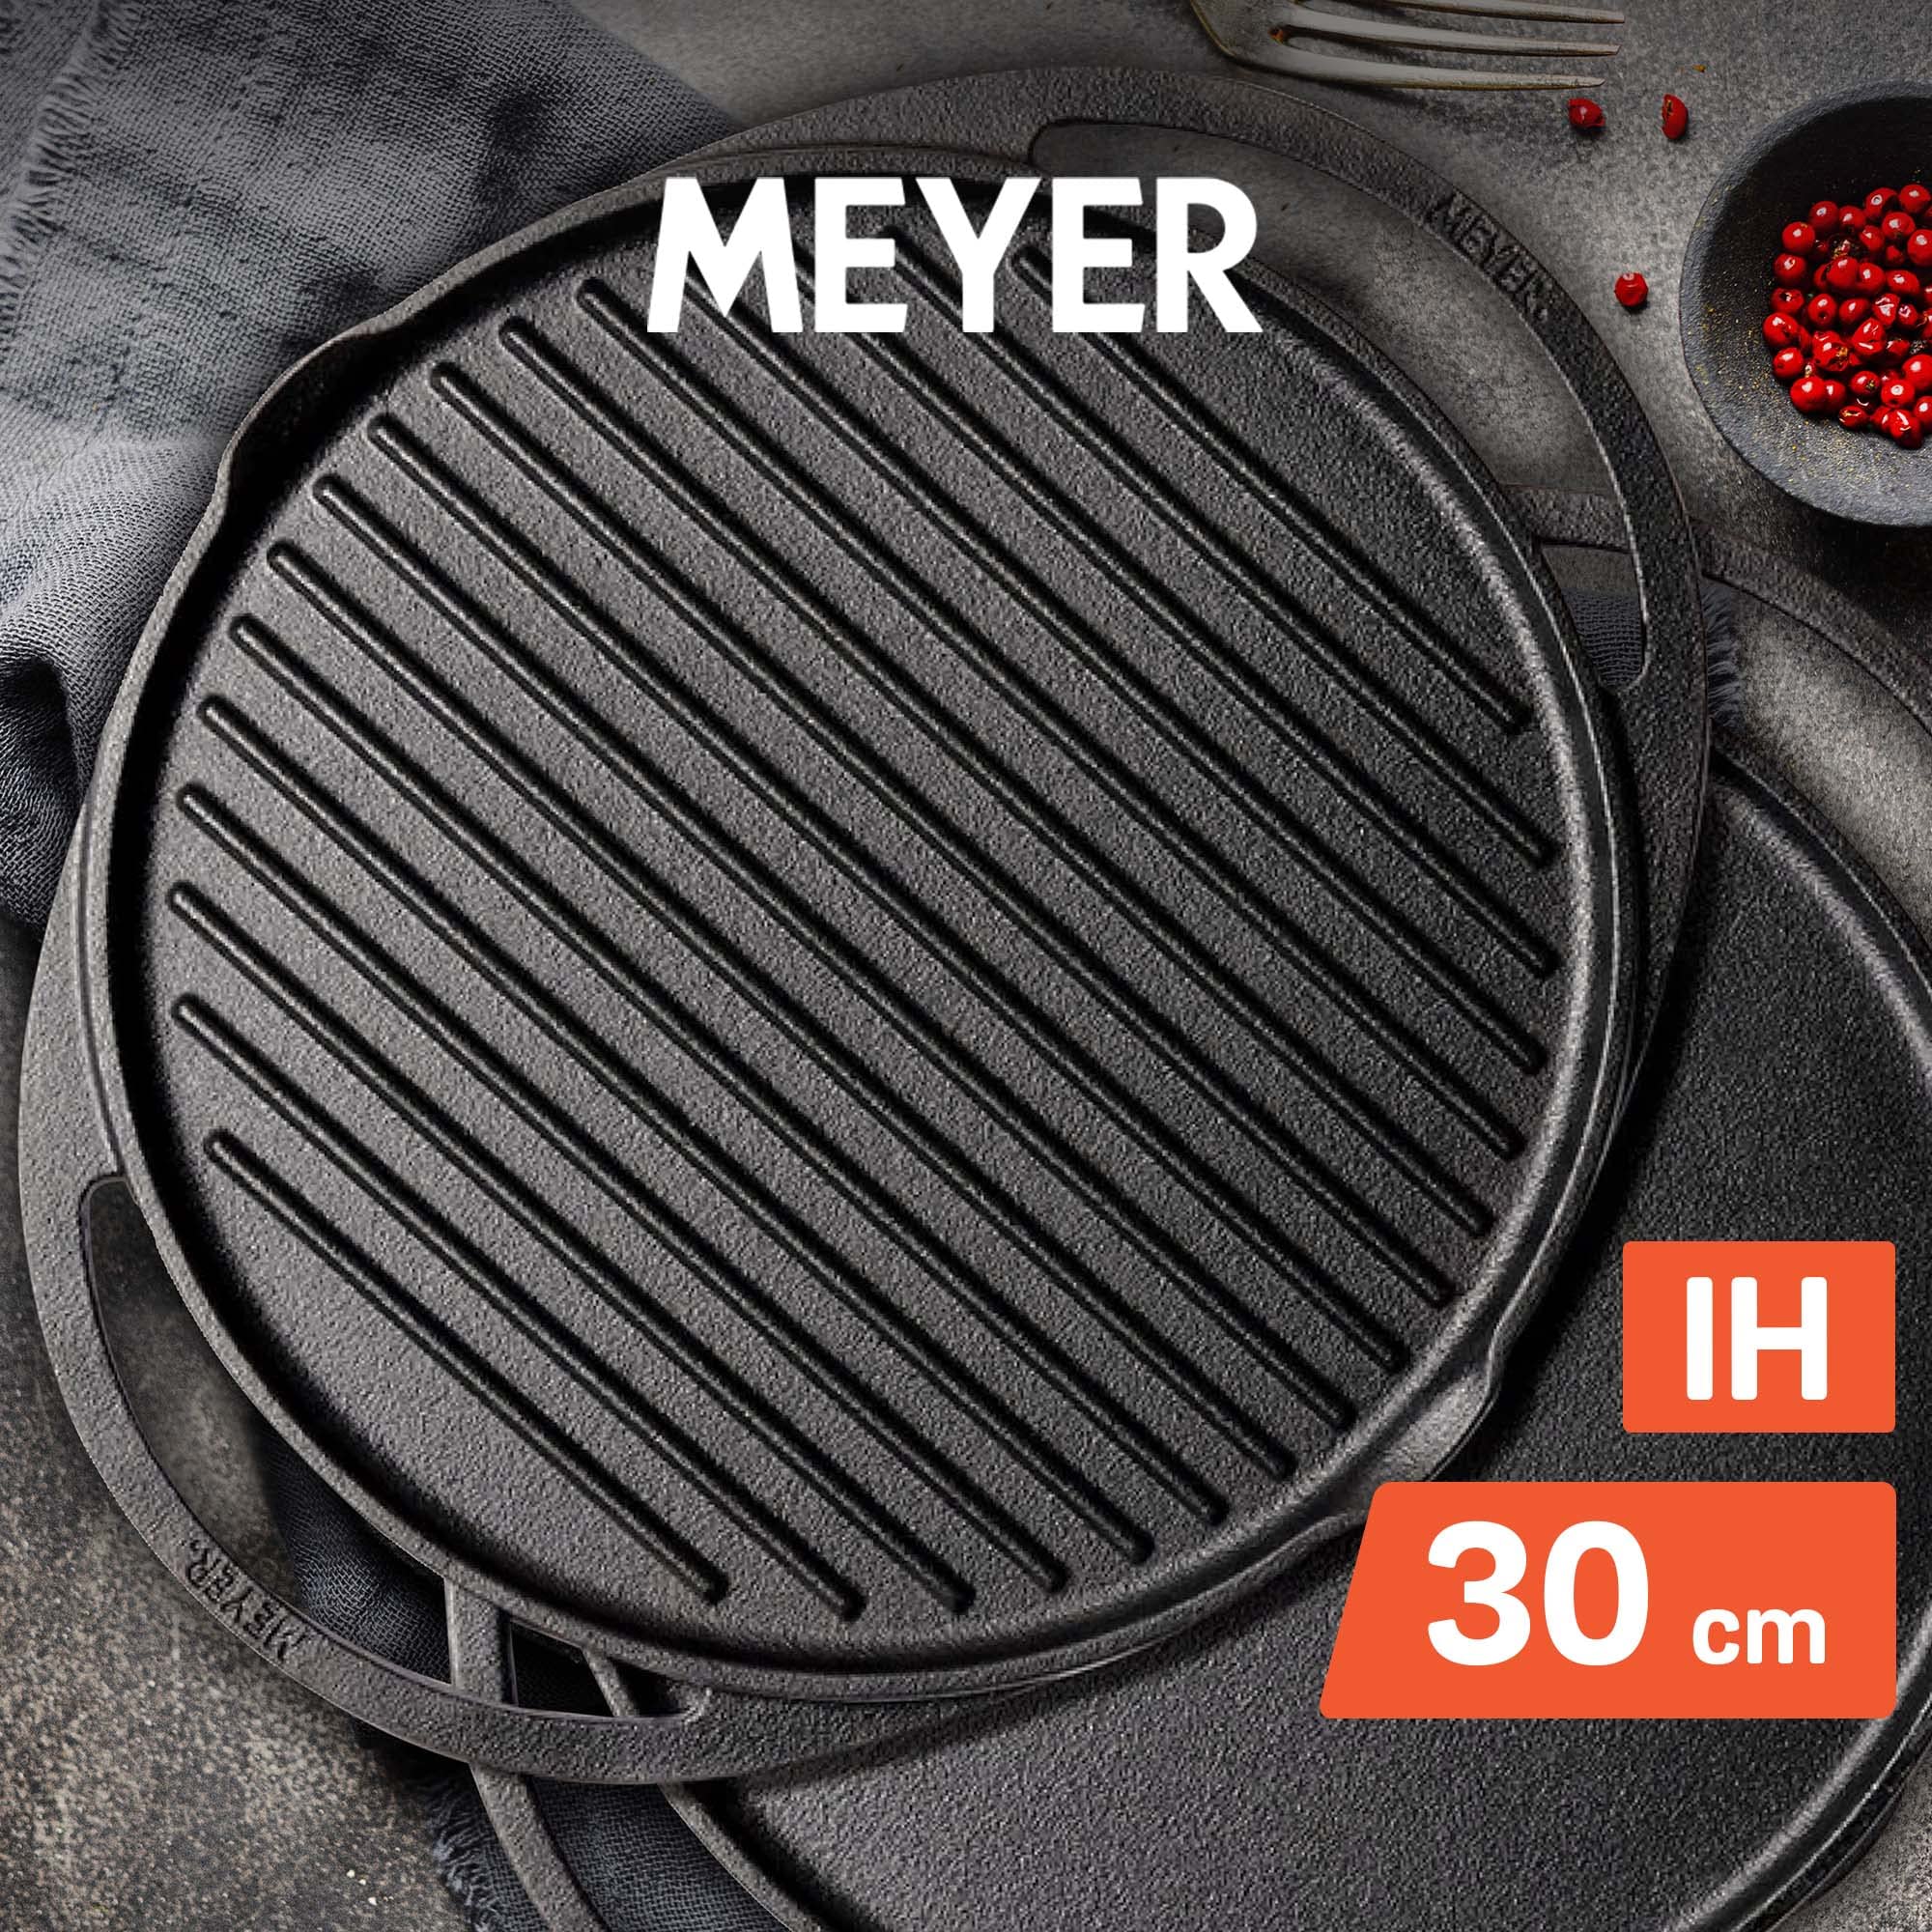 Meyer Pre-Seasoned Cast Iron 2 in 1 Grill and Griddle Pan | Cast Iron Tawa for Dosa | Iron Cookware for Kitchen | Roti Tawa Cast Iron | Cast Iron Grill Pan | Iron Tava Big Size, 30cm, Black